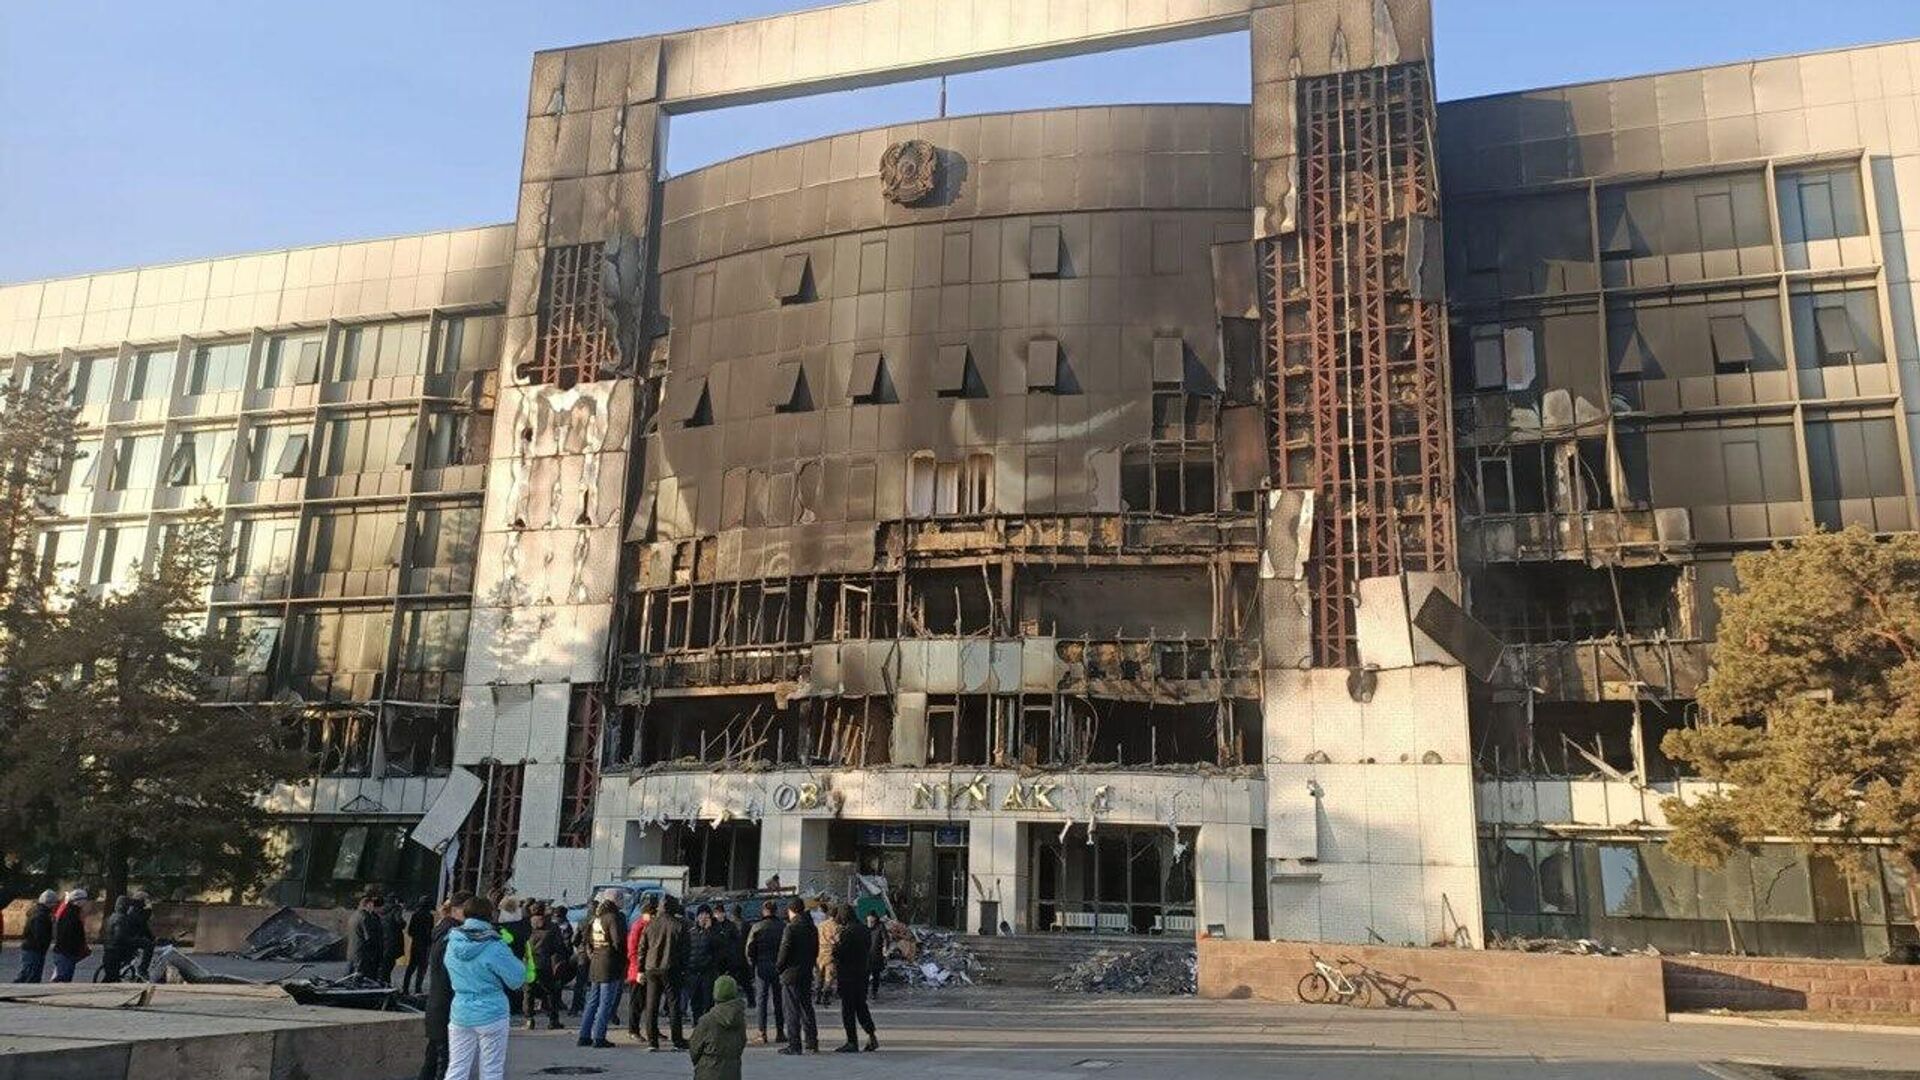 The city administation in the Kazakh city of Taldykorgan is seen burned amid the ongoing protests in Kazakhstan. - Sputnik International, 1920, 14.03.2022